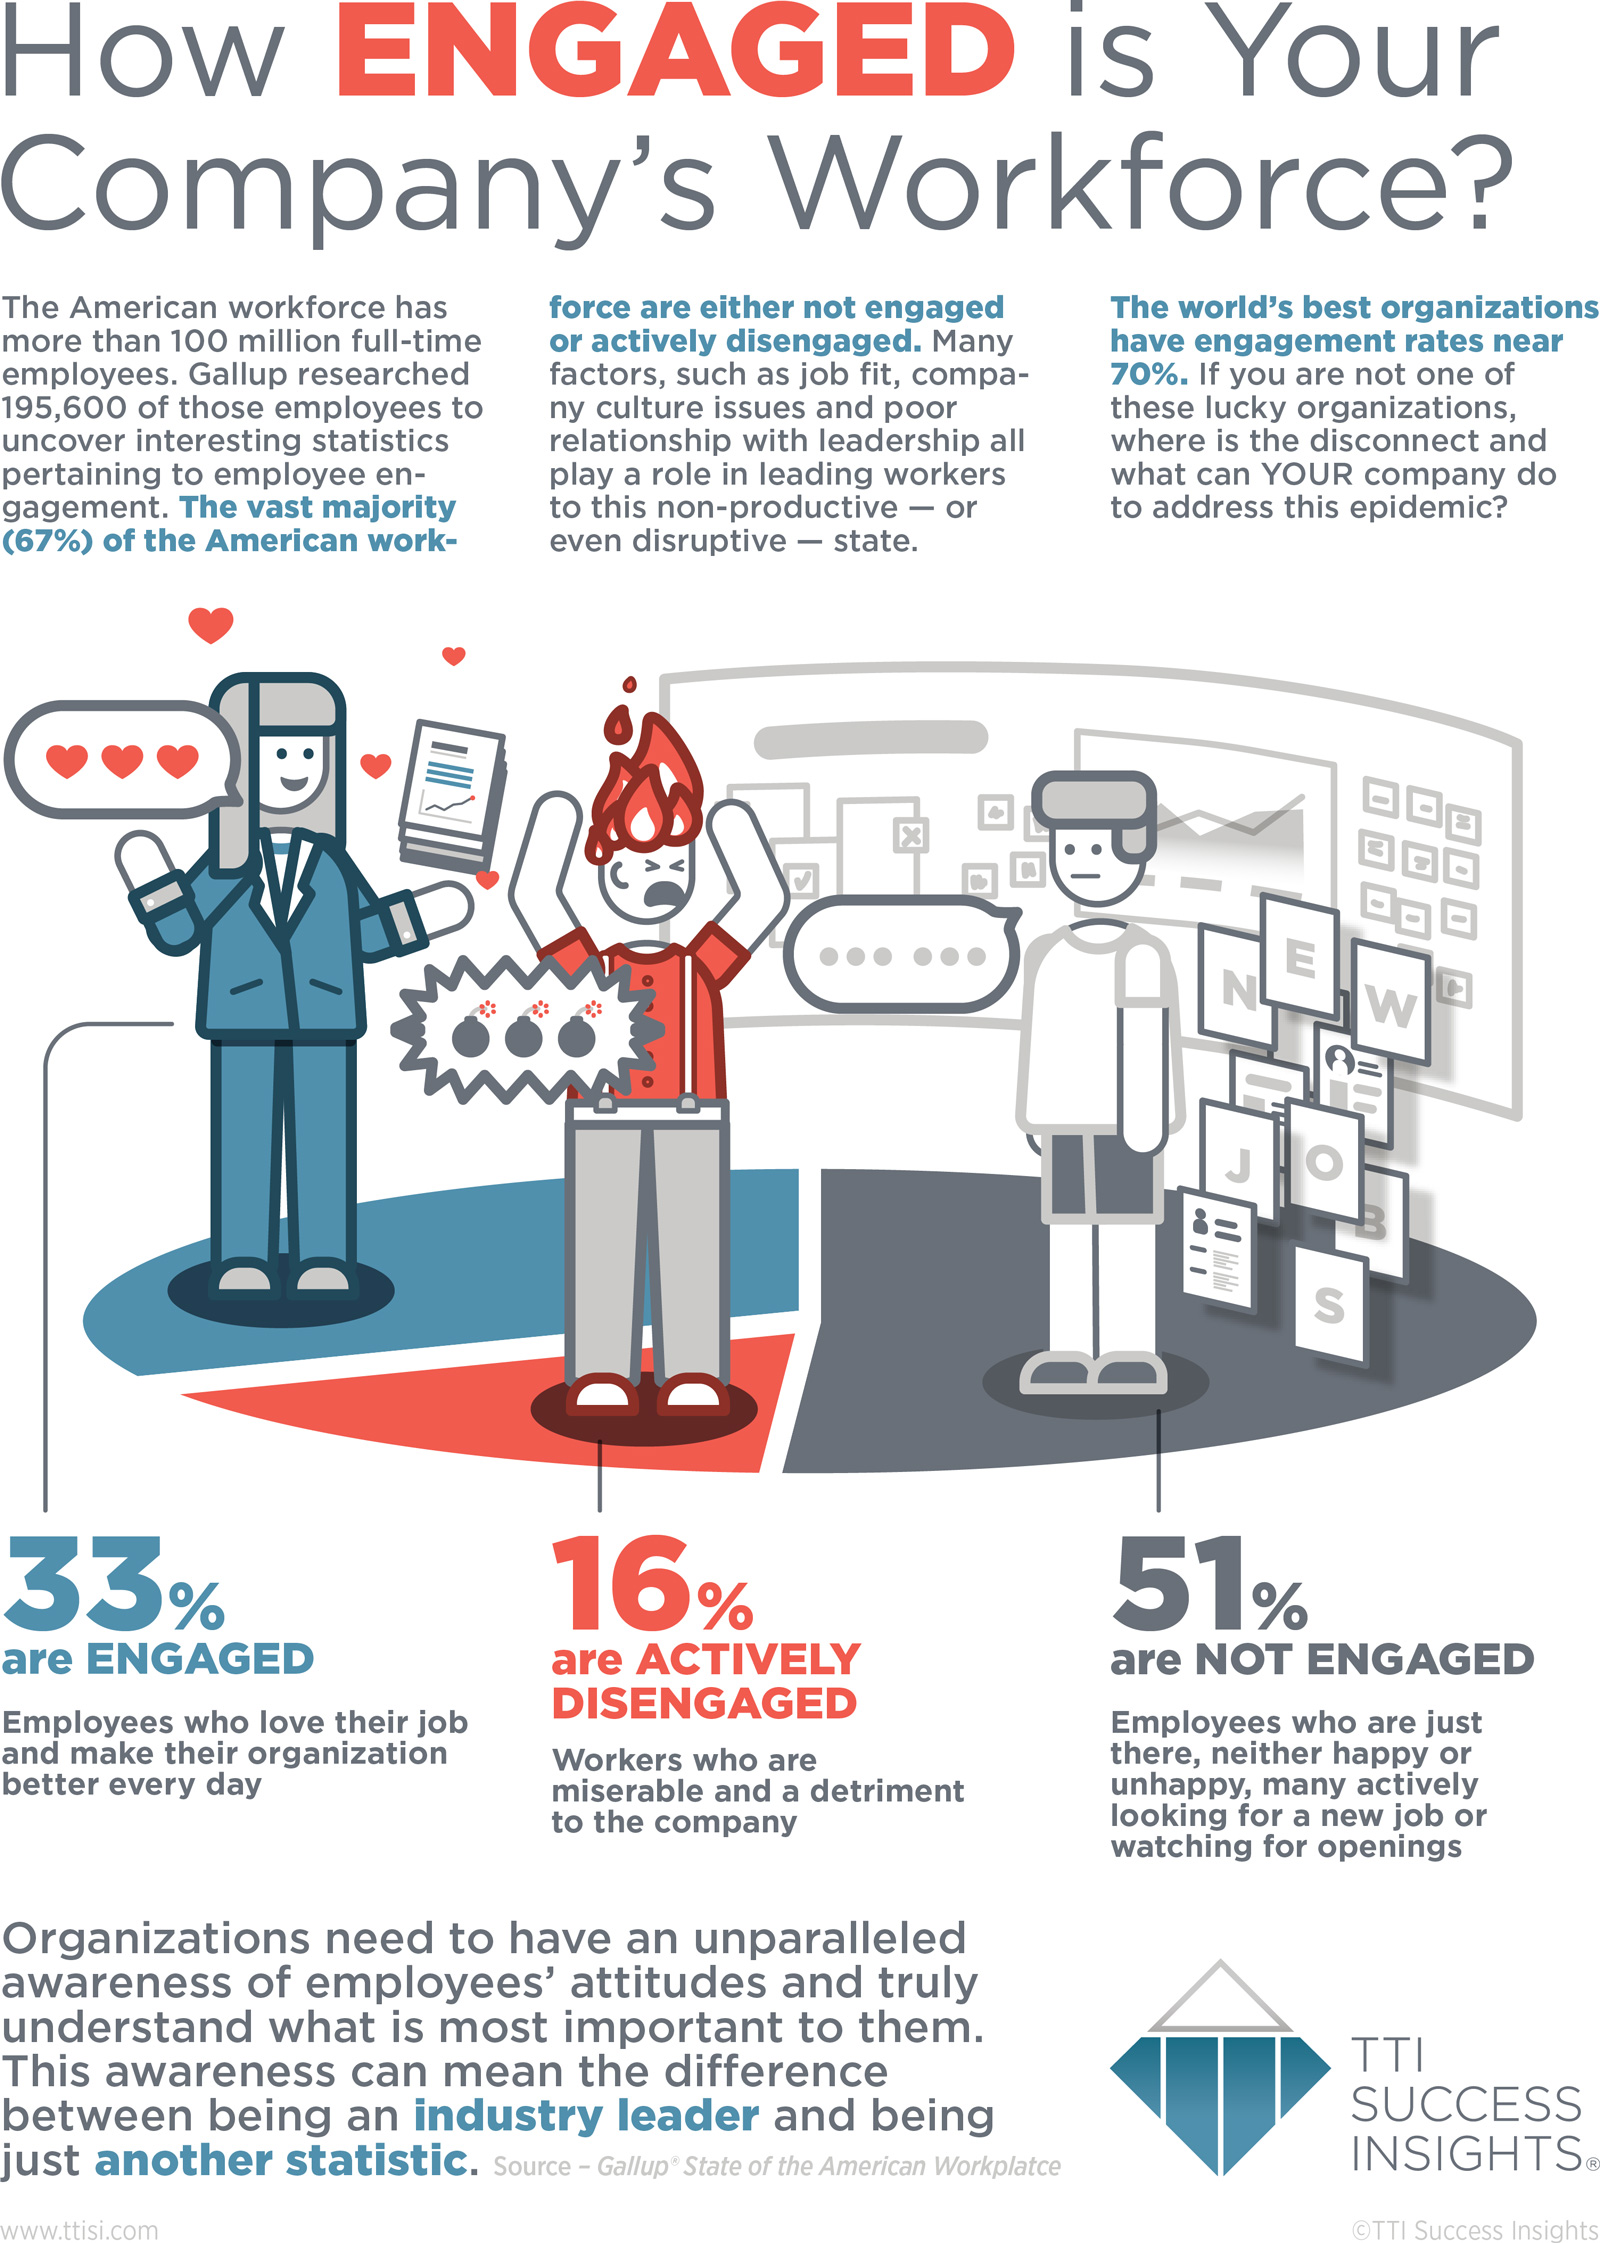 How-ENGAGED-is-Your-Company-Workforce-infographic